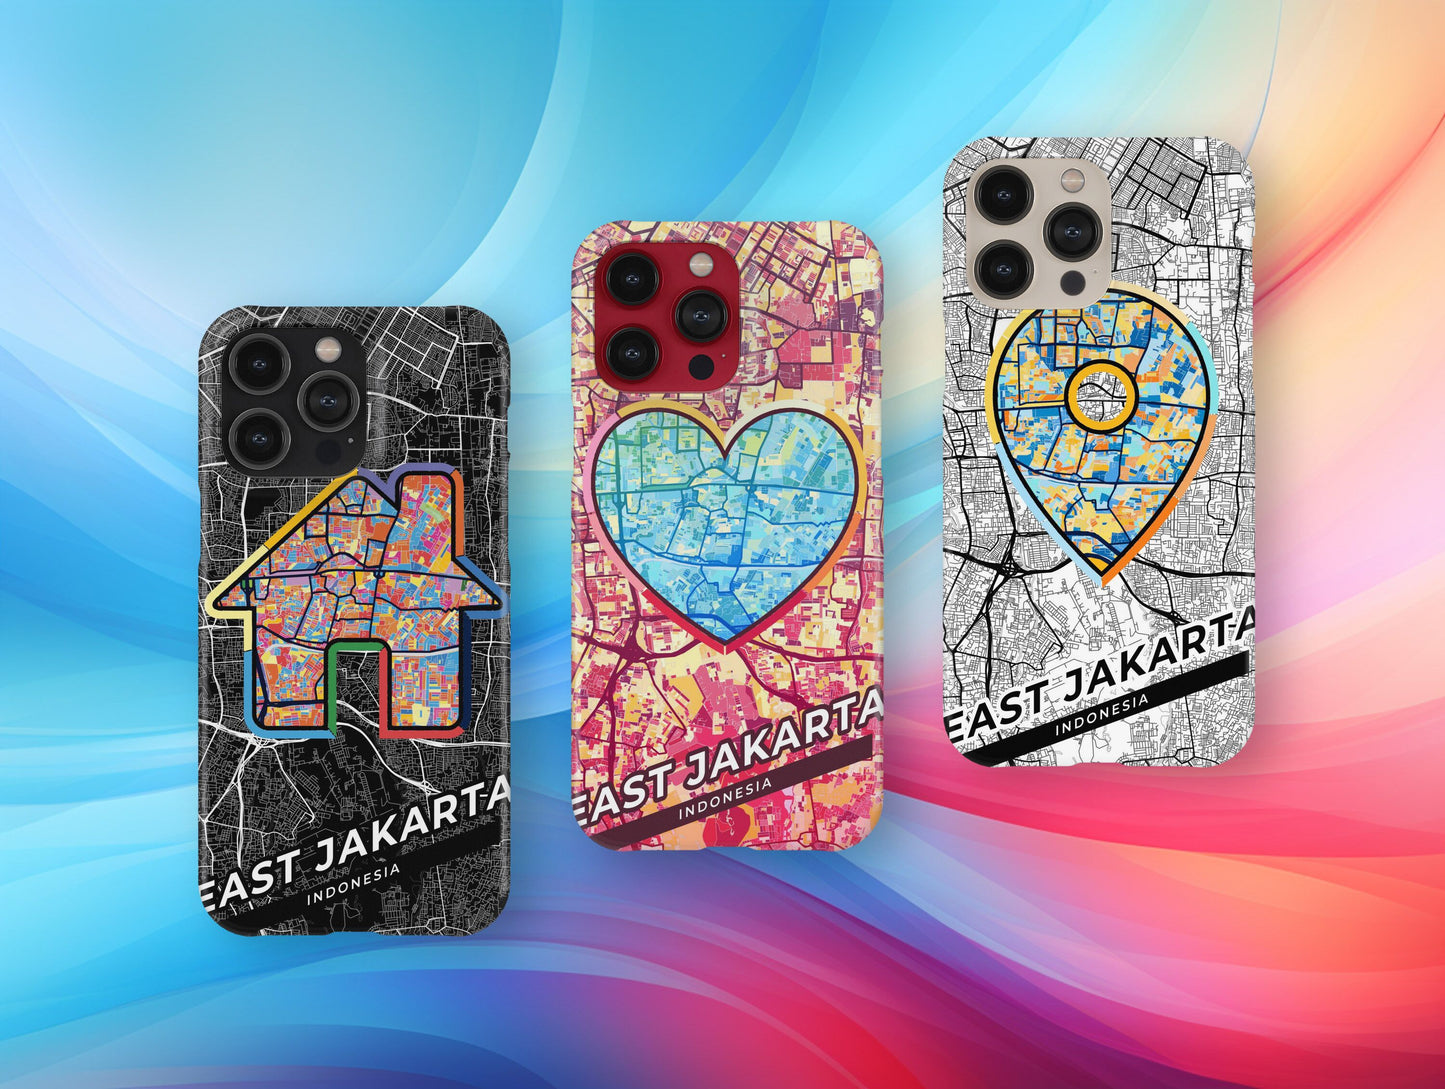 East Jakarta Indonesia slim phone case with colorful icon. Birthday, wedding or housewarming gift. Couple match cases.